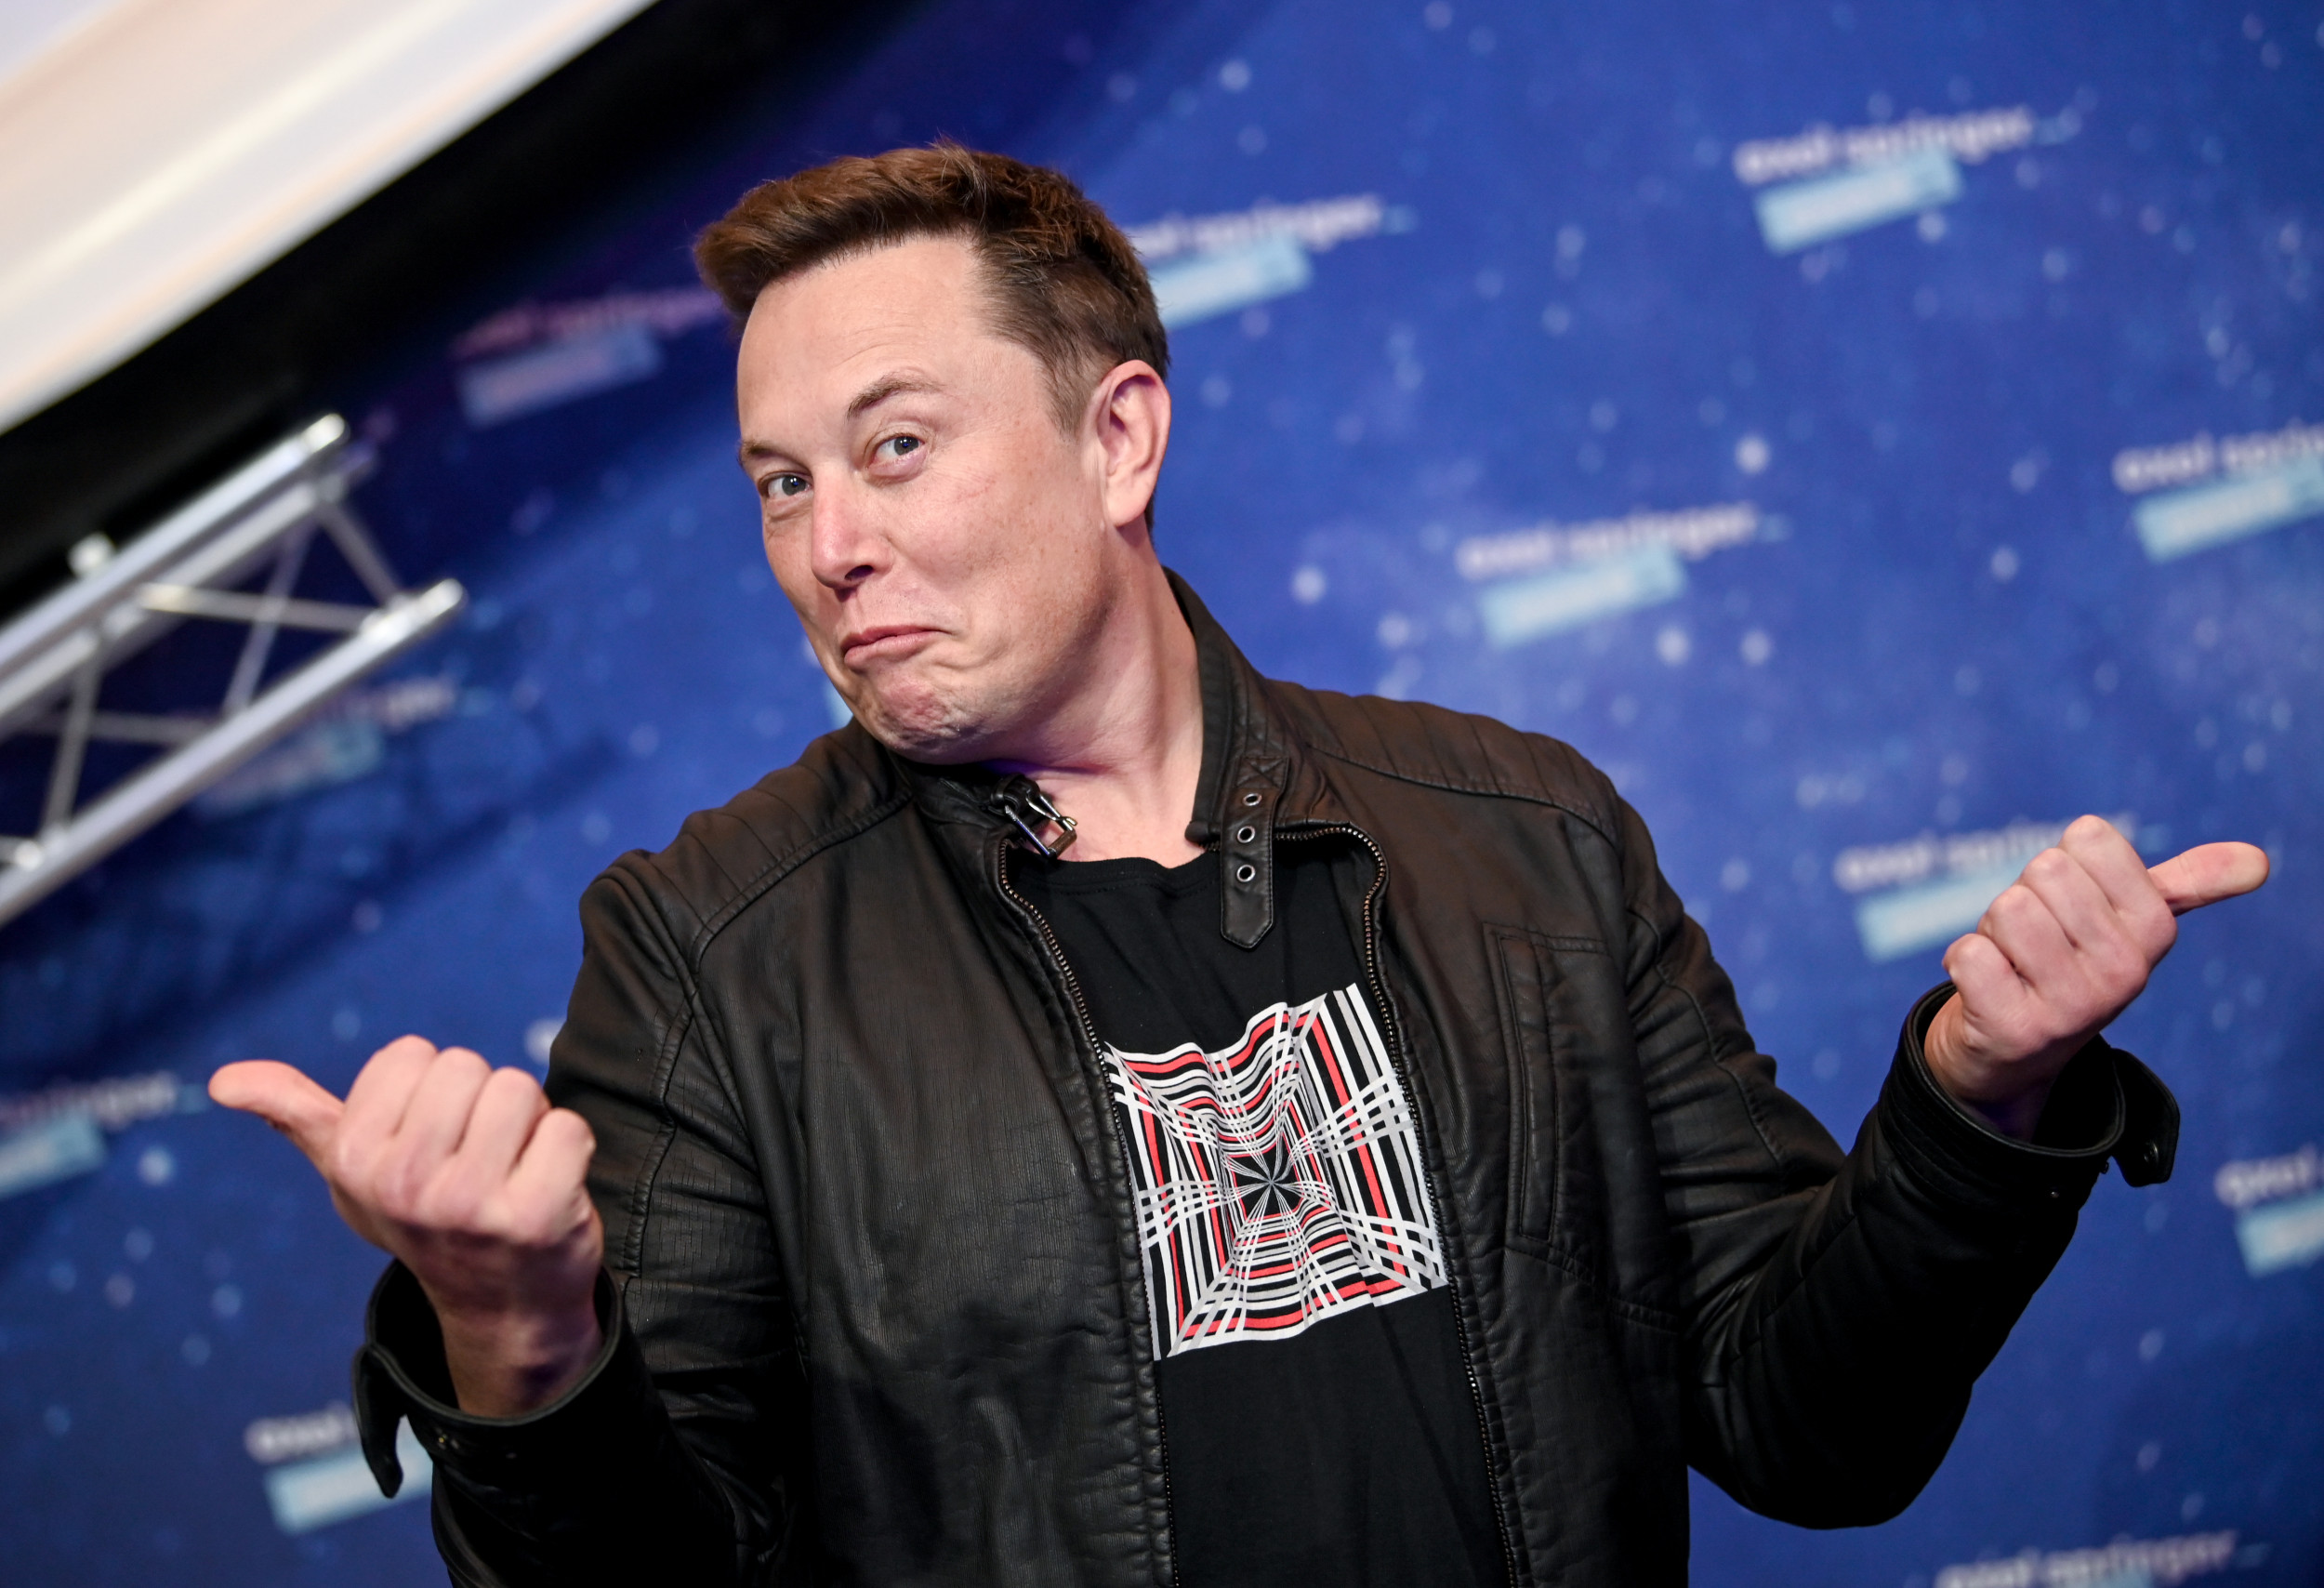 Elon Musk Changes Twitter Bio To Bitcoin After Apparent Nod To Dogecoin With Meme